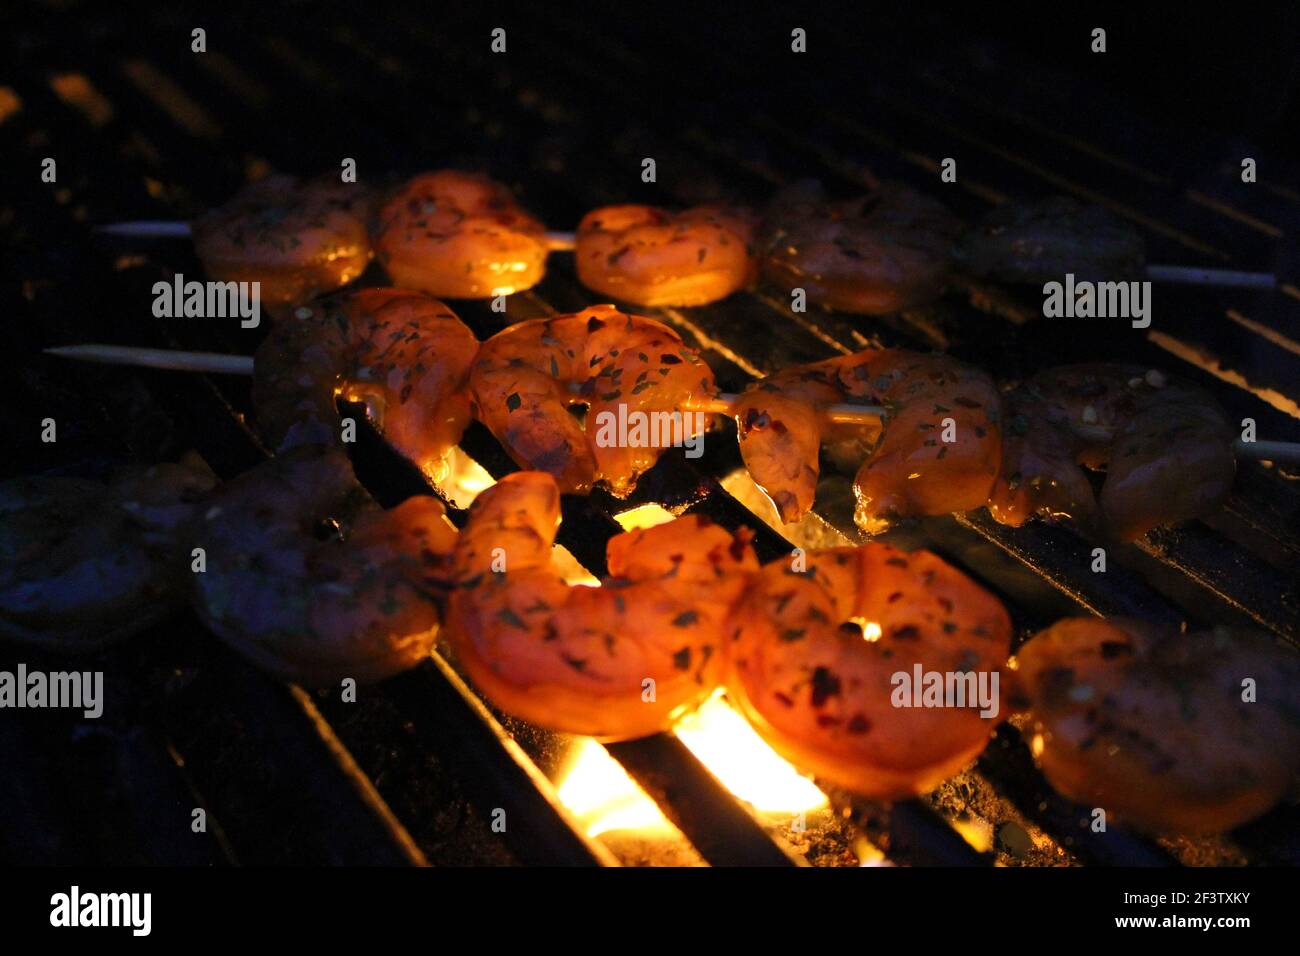 Close-up of shrimp on a barbecue grill. Lighting is from flame below shrimp, bright in center, darkening around the edges. Shrimp are on Skewers. Stock Photo